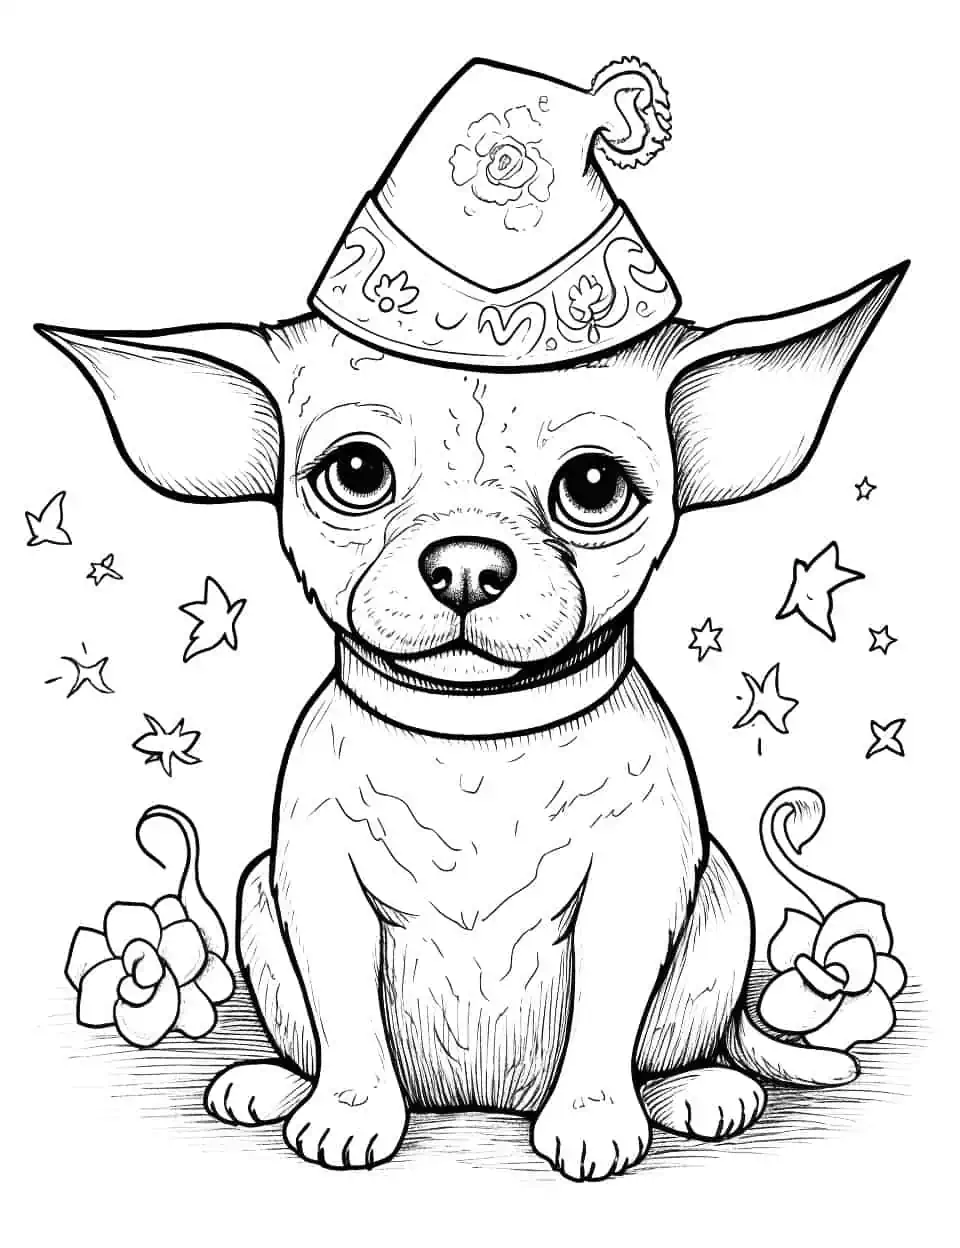 Chihuahua Fiesta Coloring Page - A Chihuahua wearing a funny hat, surrounded by decorations.